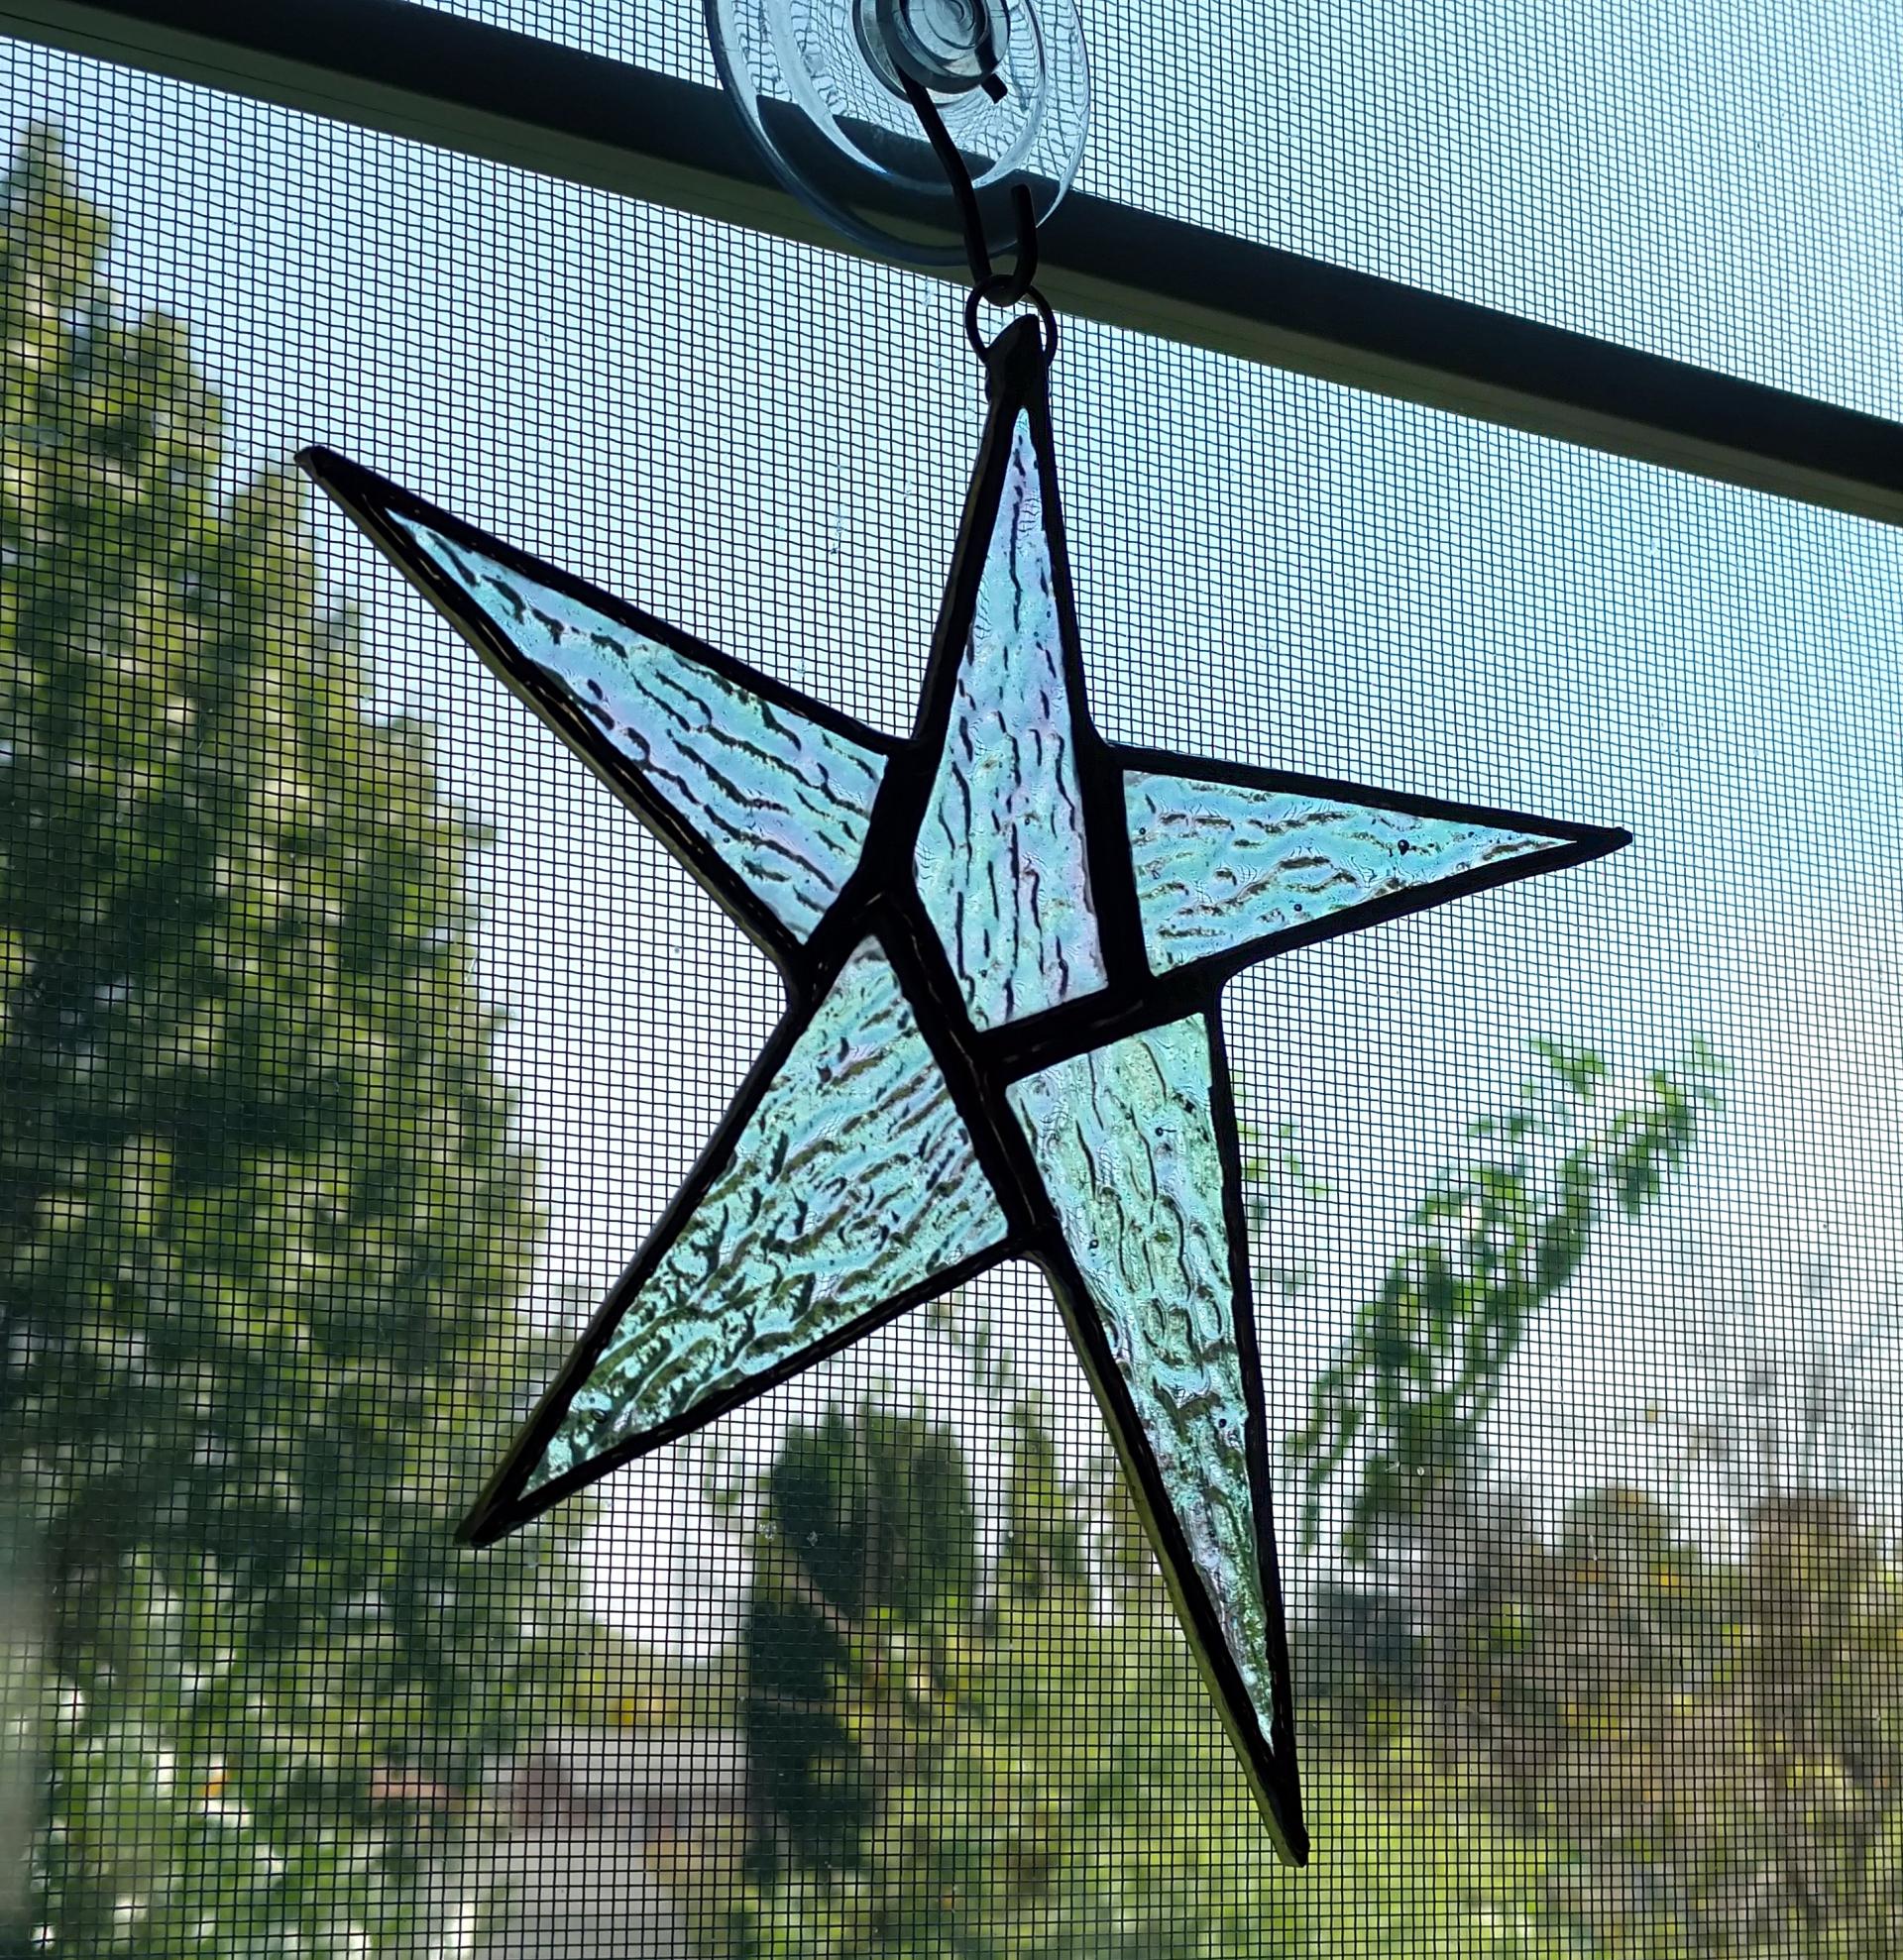 Iridescent Stained Glass Star Suncatcher, Custom Colors Available